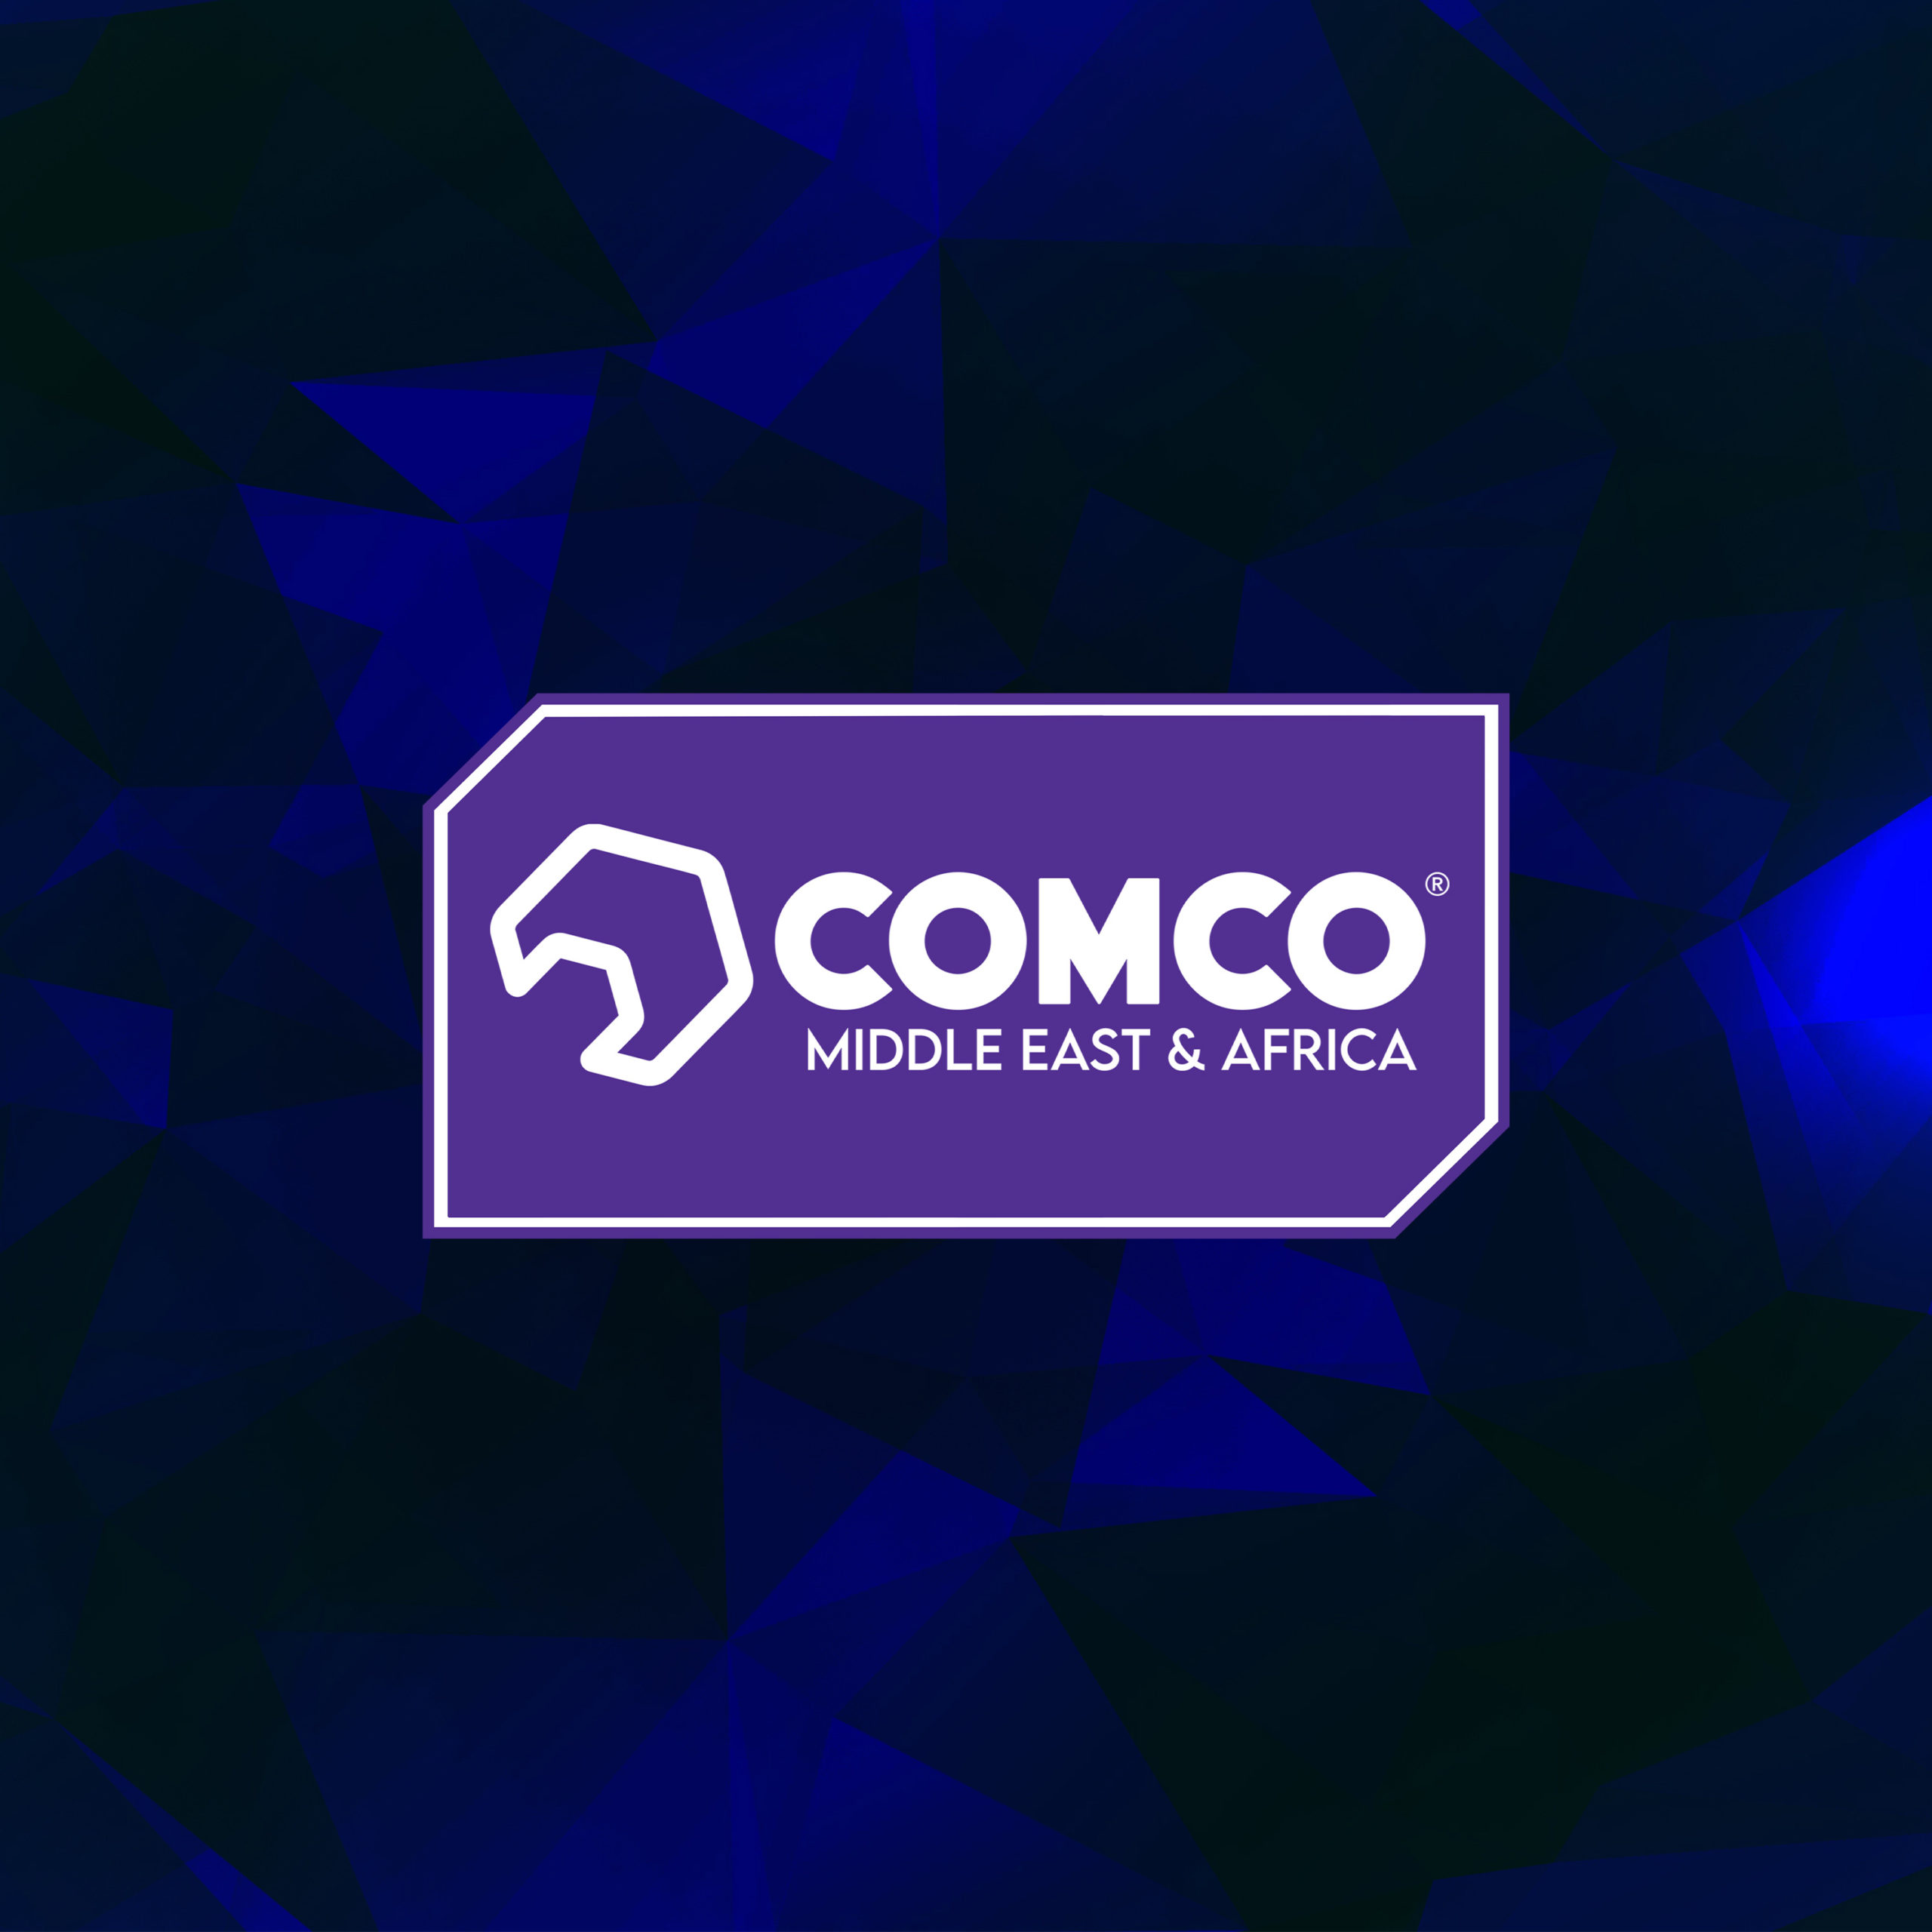 COMCO Middle East and Africa - New PR and Smart Social